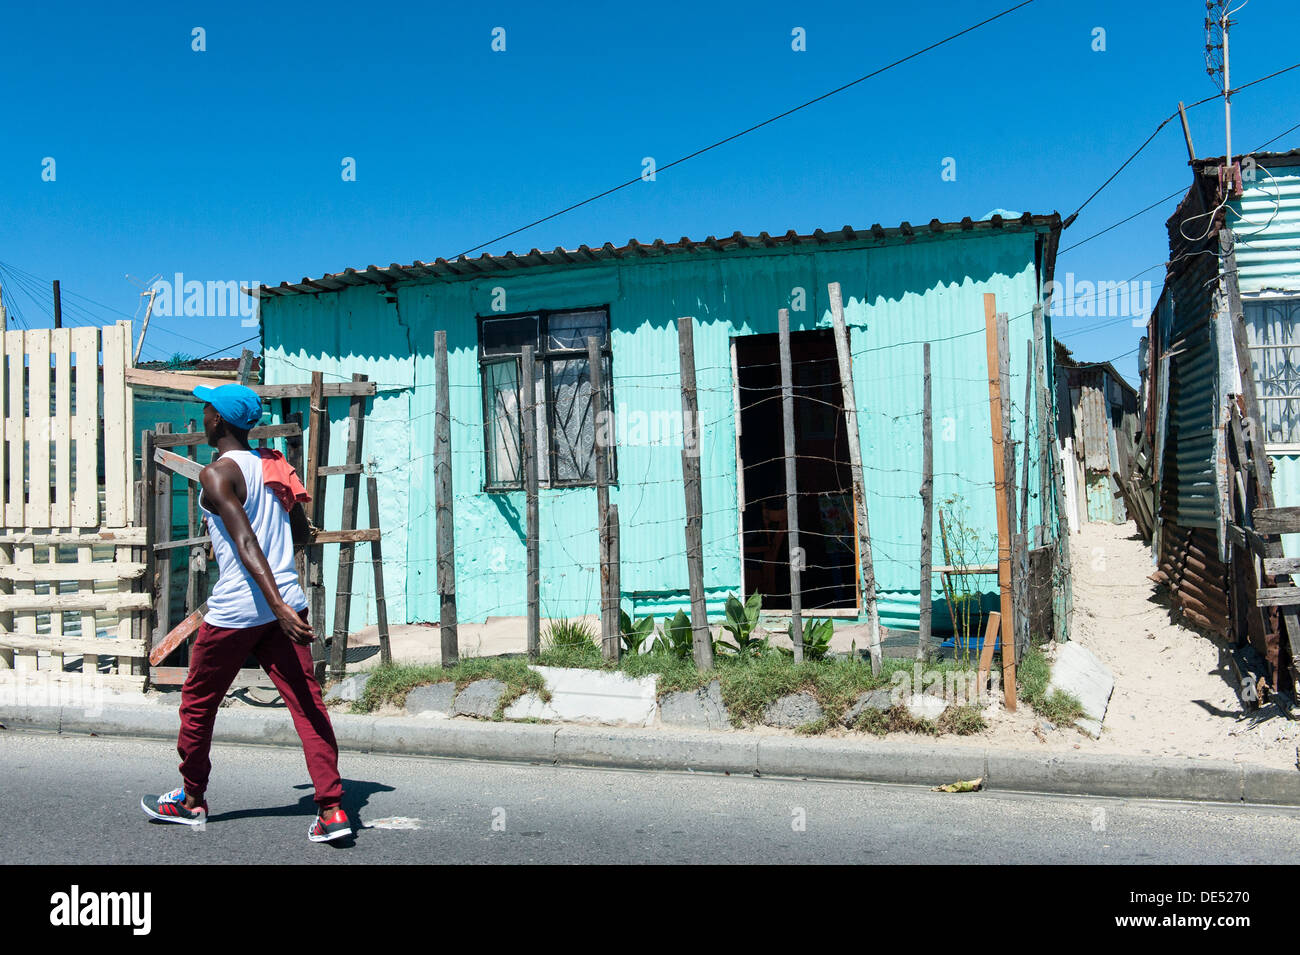 A person walking on the road in Khayelitsha, a partially informal township in Cape Town, Western Cape, South Africa Stock Photo